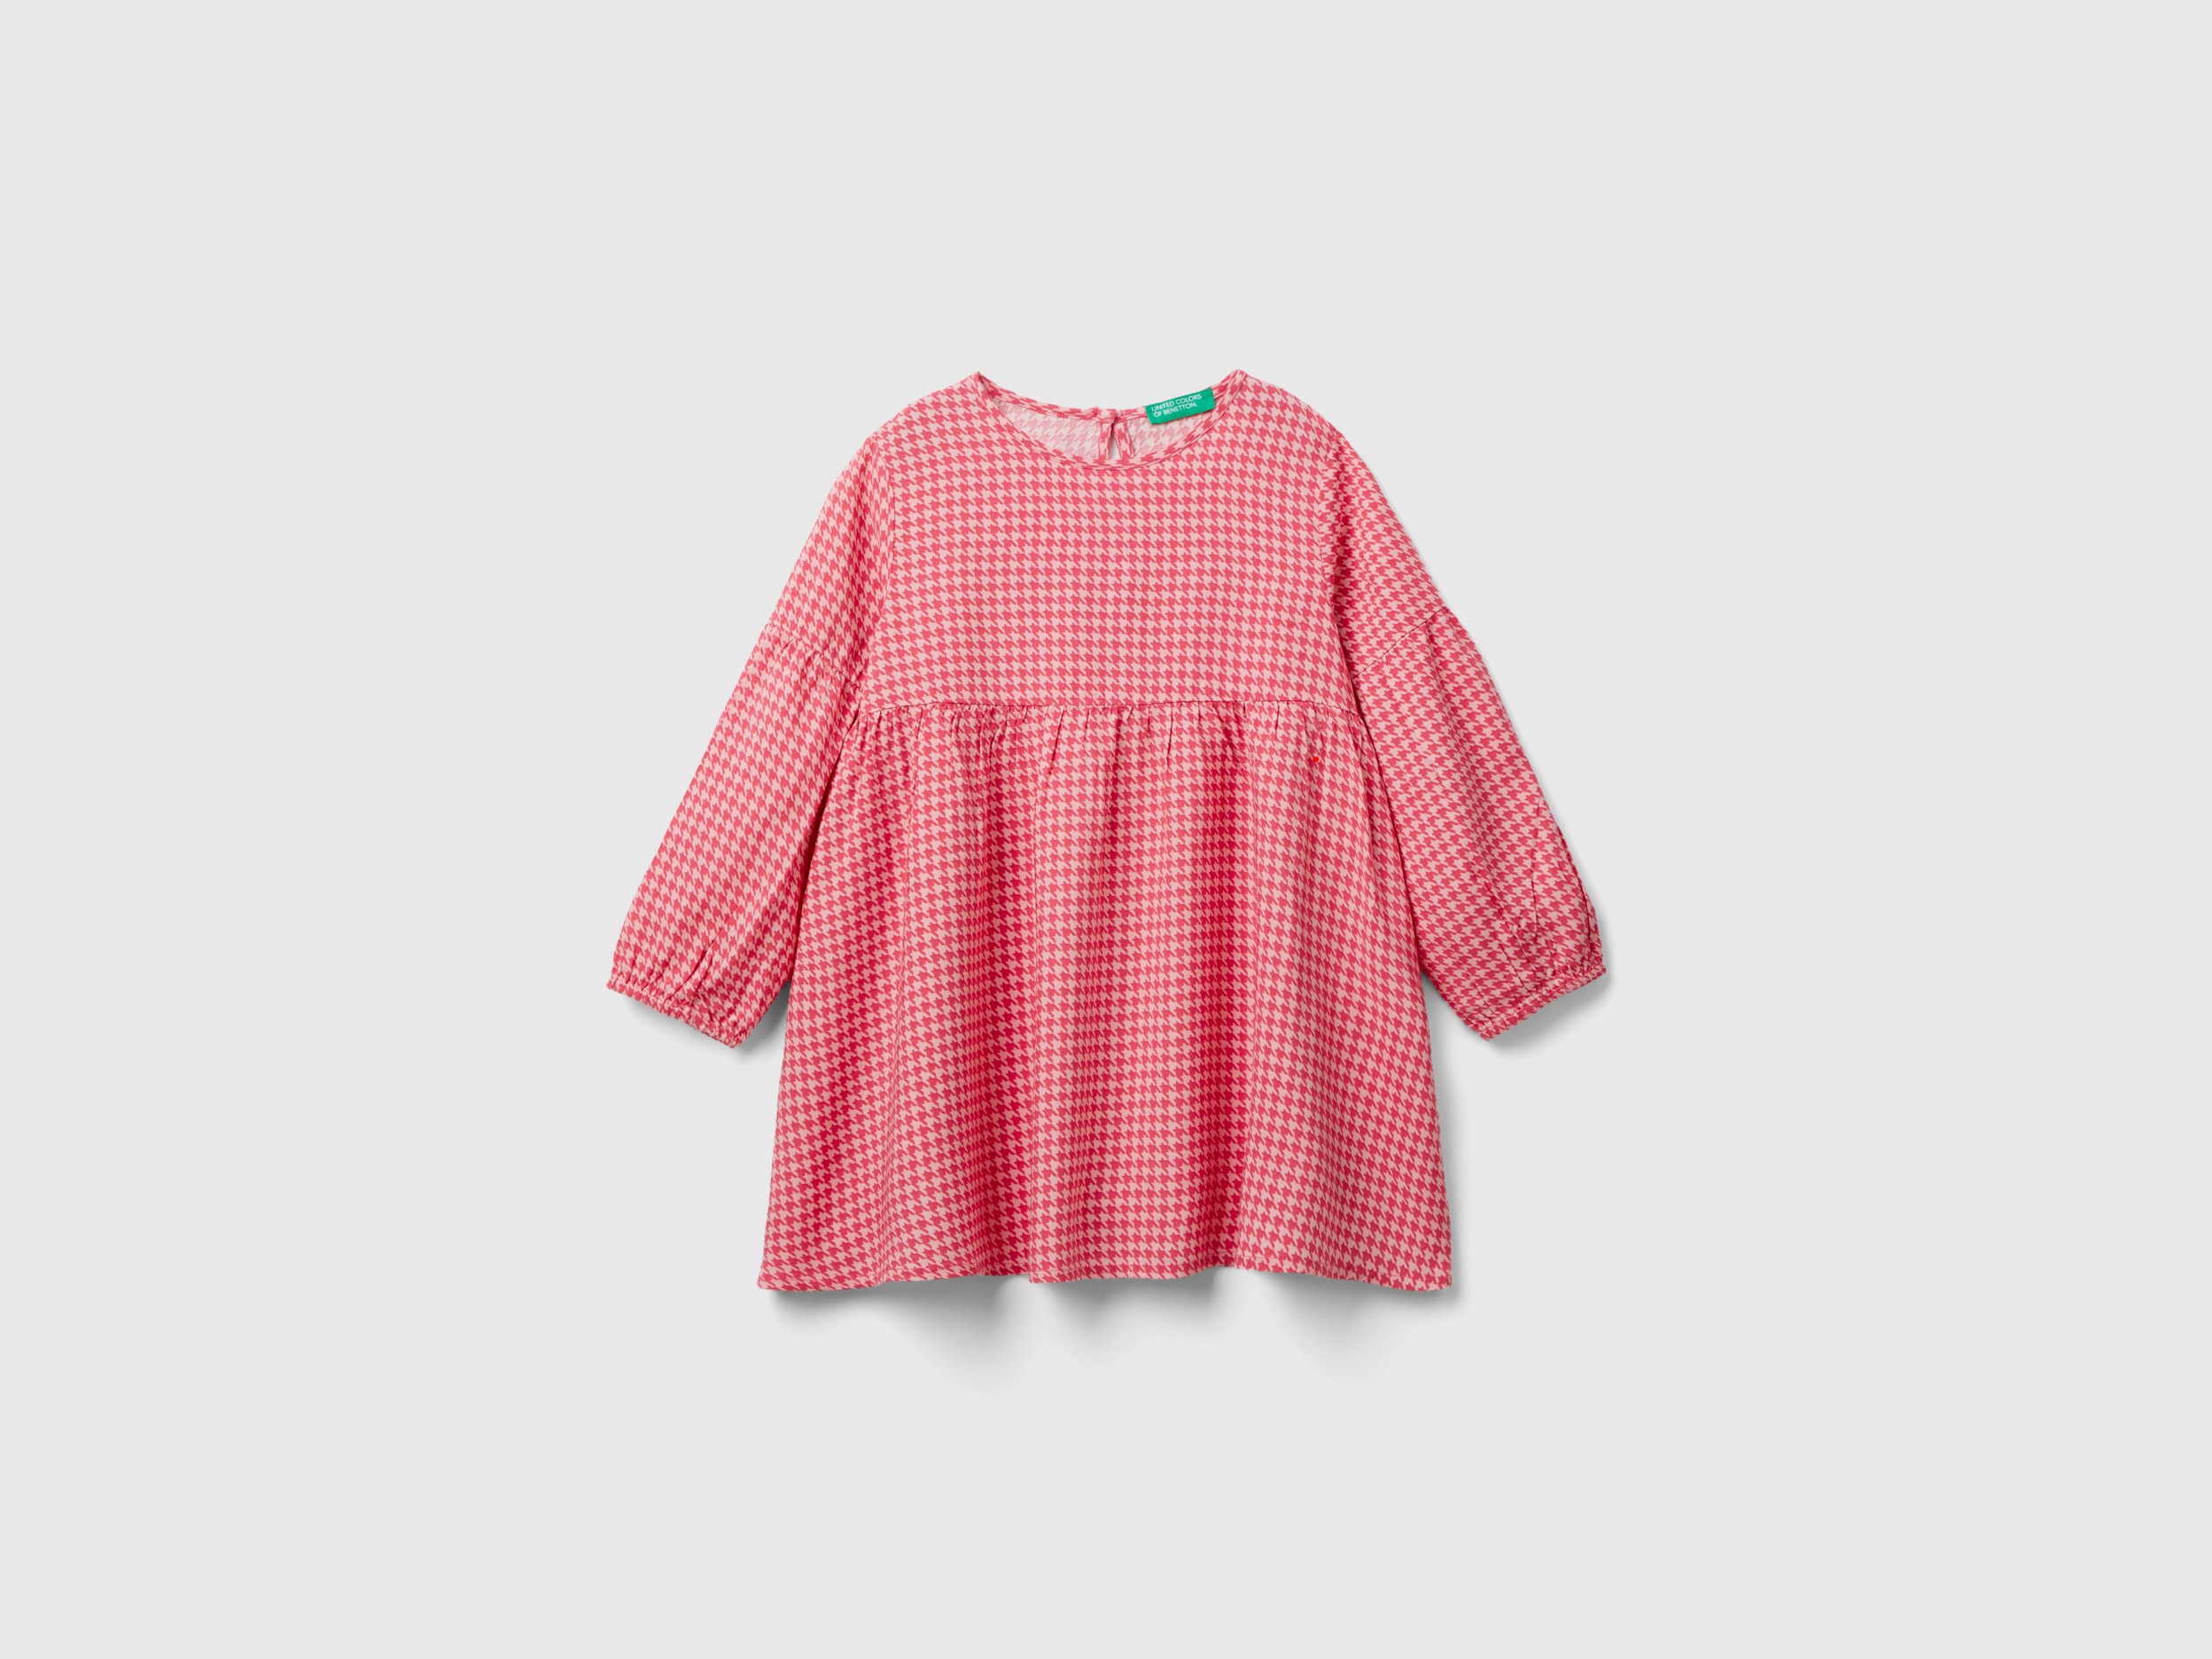 Benetton, Houndstooth Dress In Sustainable Viscose, size 2-3, Pink, Kids